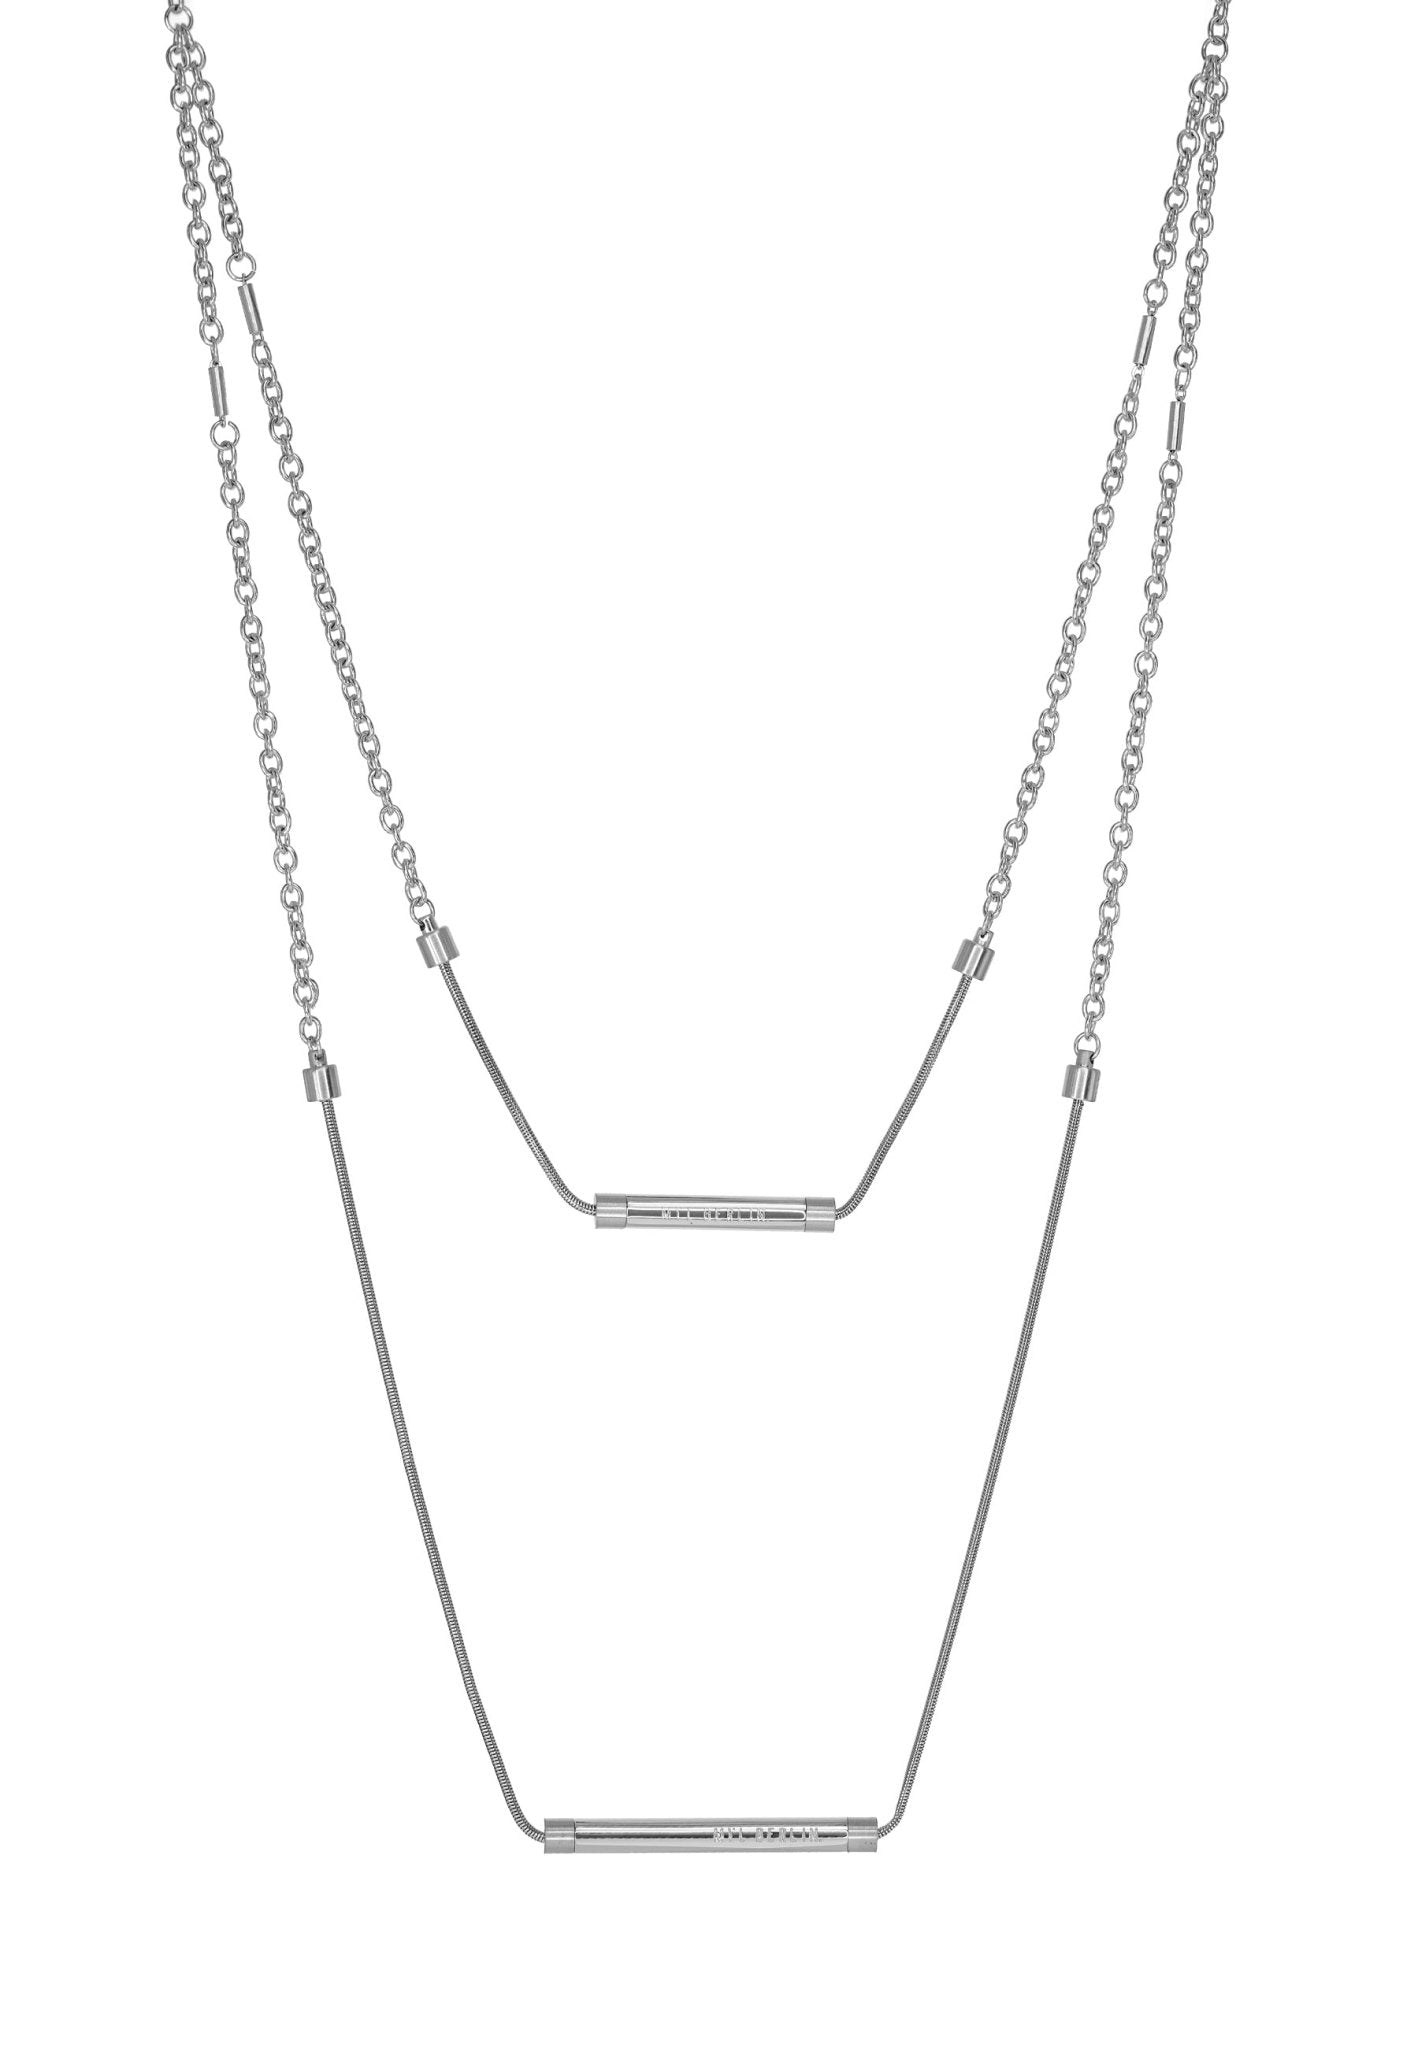 Layered Chain Tube Necklace - MYL BERLIN - 4260654111507 - 4260654111507